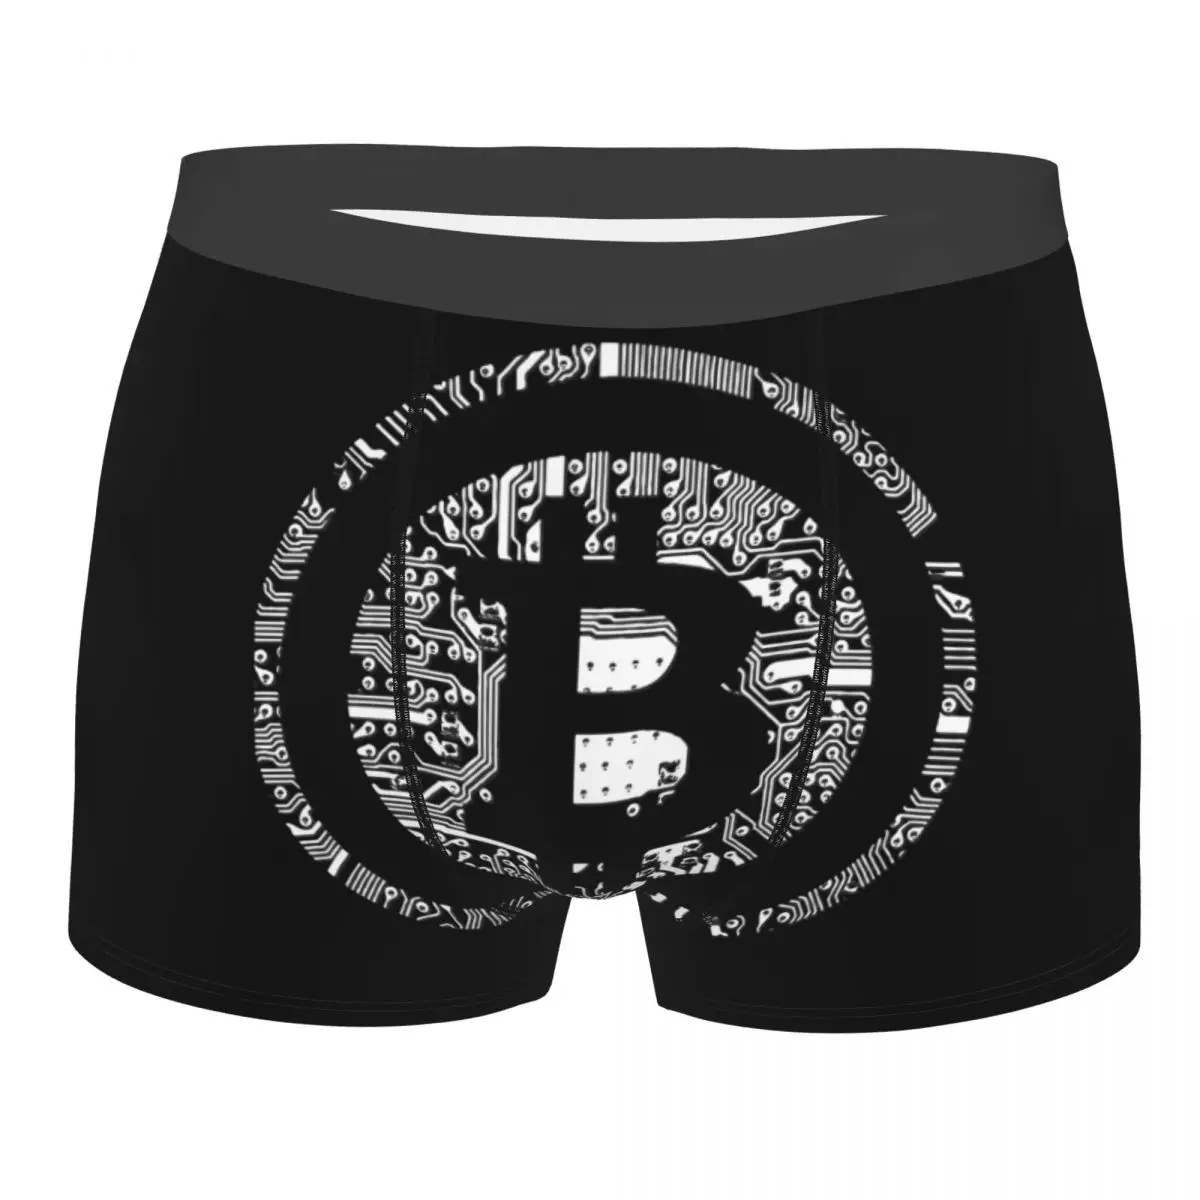 

Man Bitcoin Freedom Bitcoin Crypto Currency Underwear Btc Blockchain Boxer Briefs Shorts Panties Male Breathable Underpants